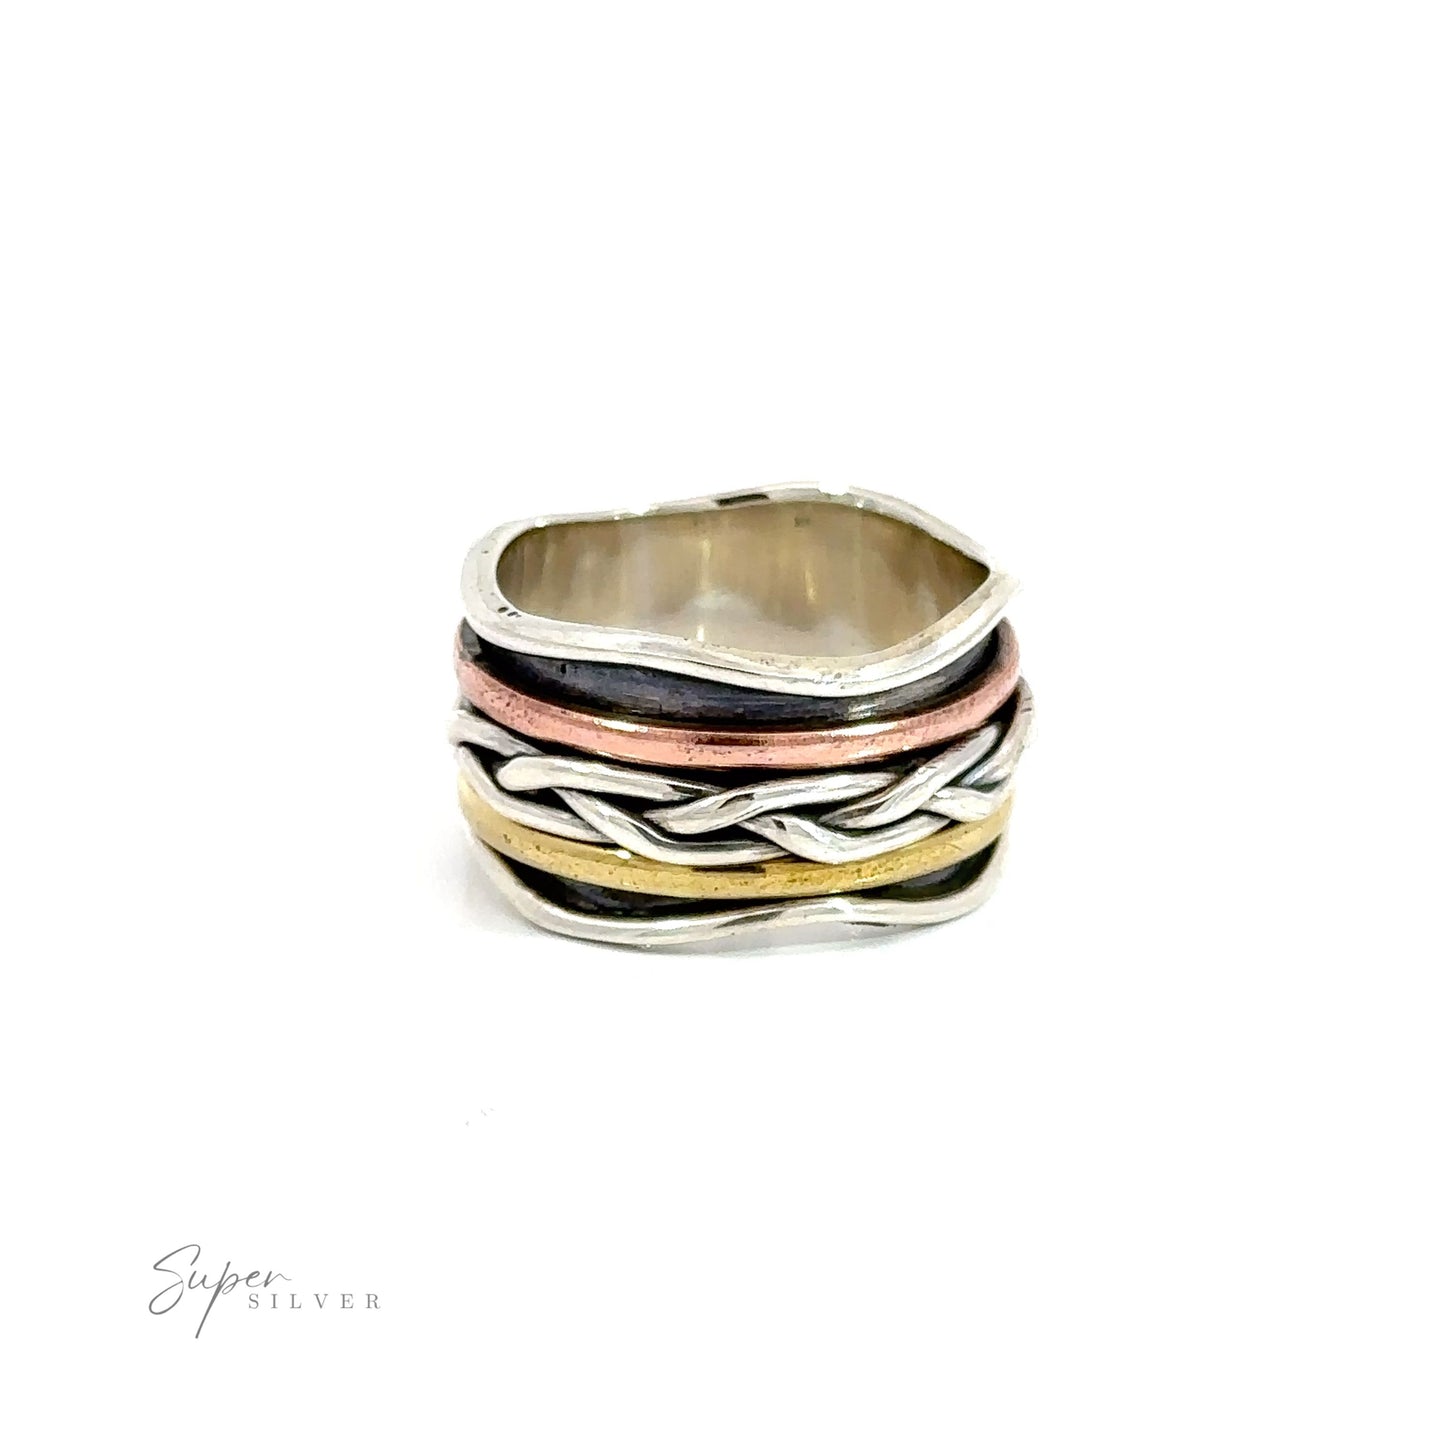 A Handmade Spinner with Gold, Copper, and a Braided Silver Band with multi colored stripes on it.